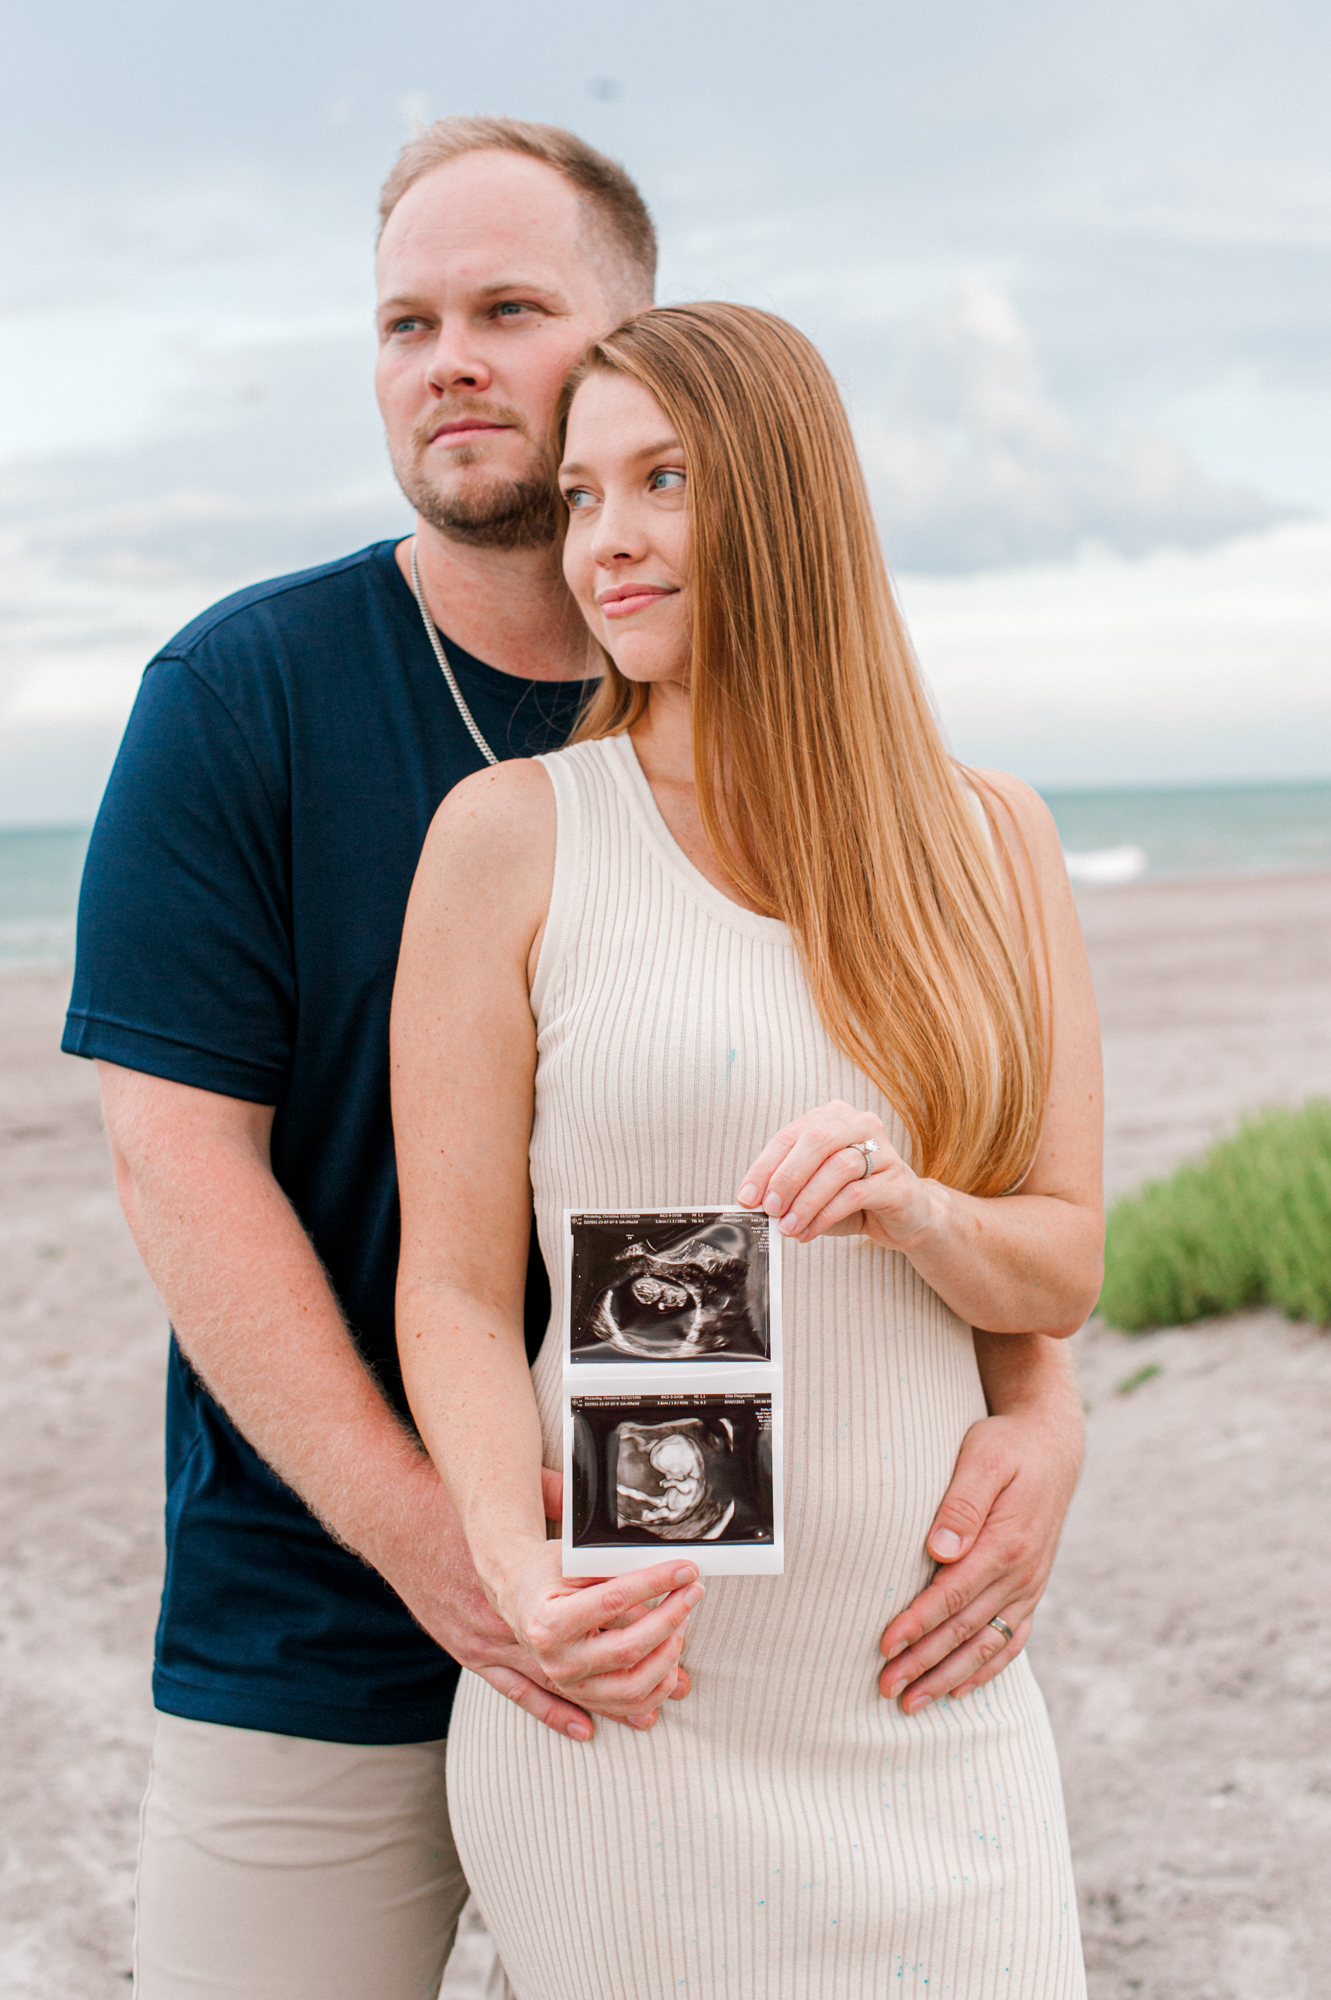 New parents hold an ultrasound photo over moms pregnant belly at the beach during their announcement photoshoot